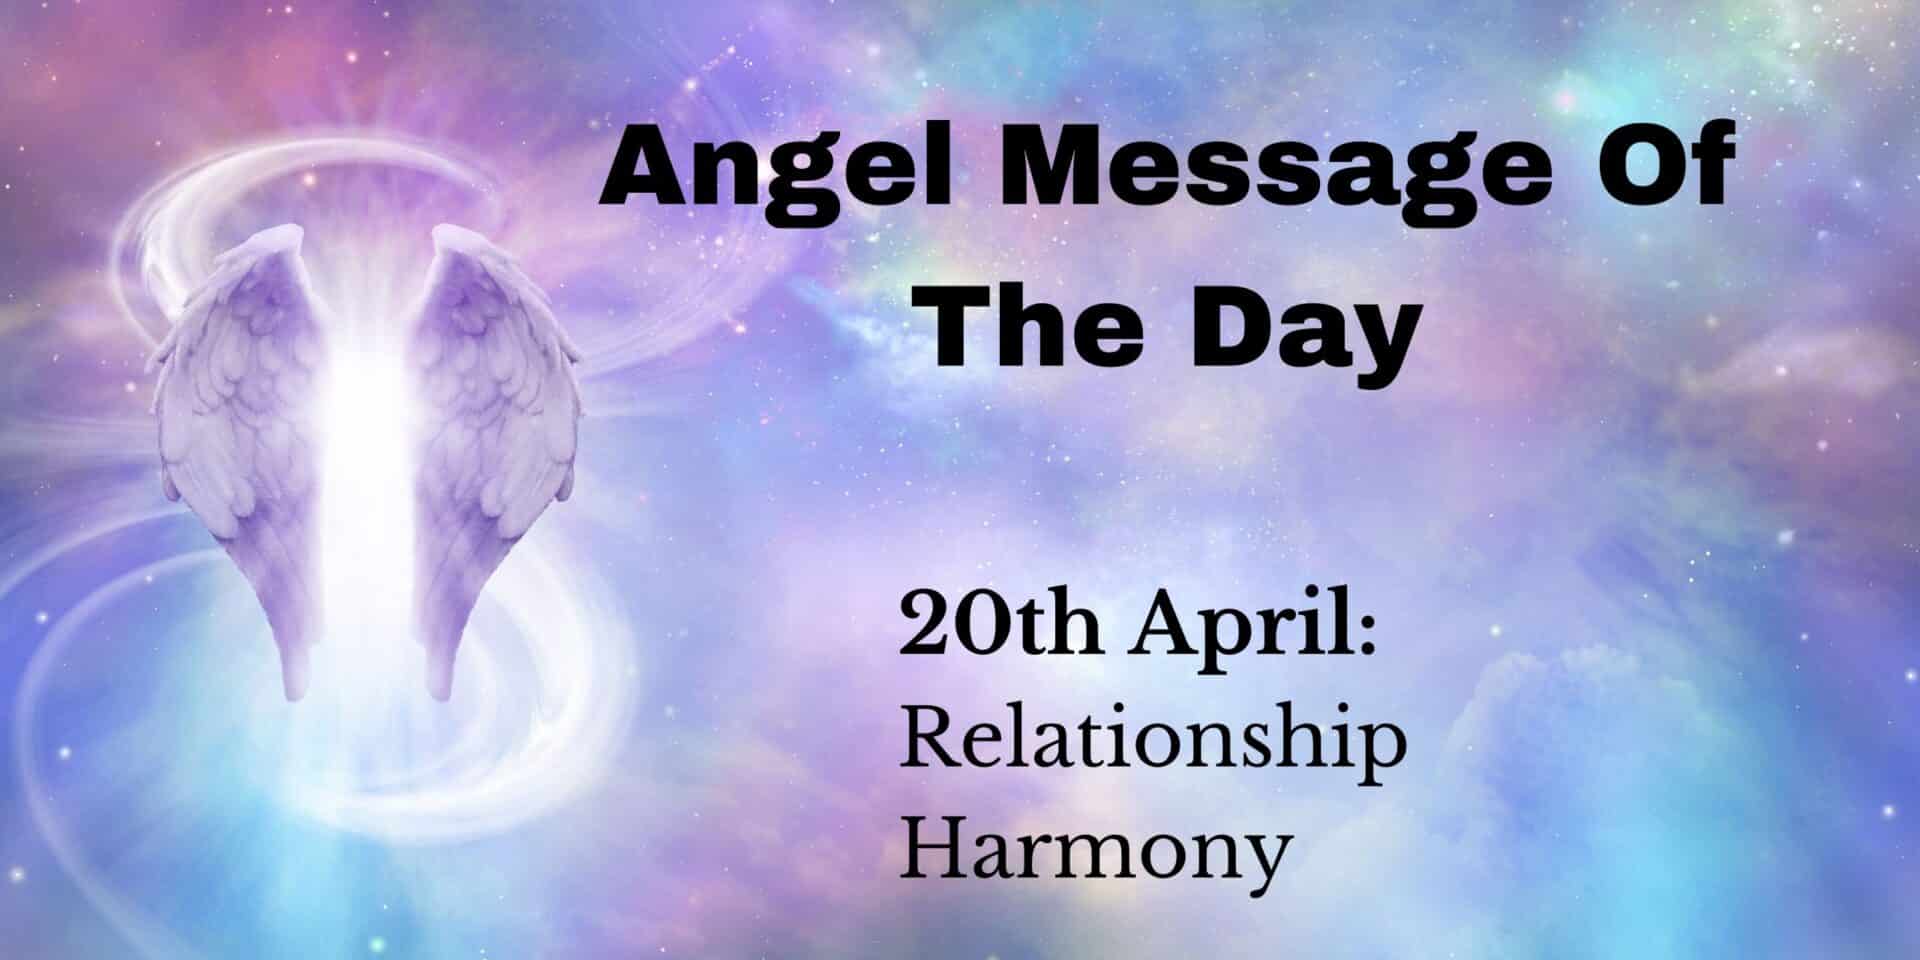 angel message of the day : relationship harmony